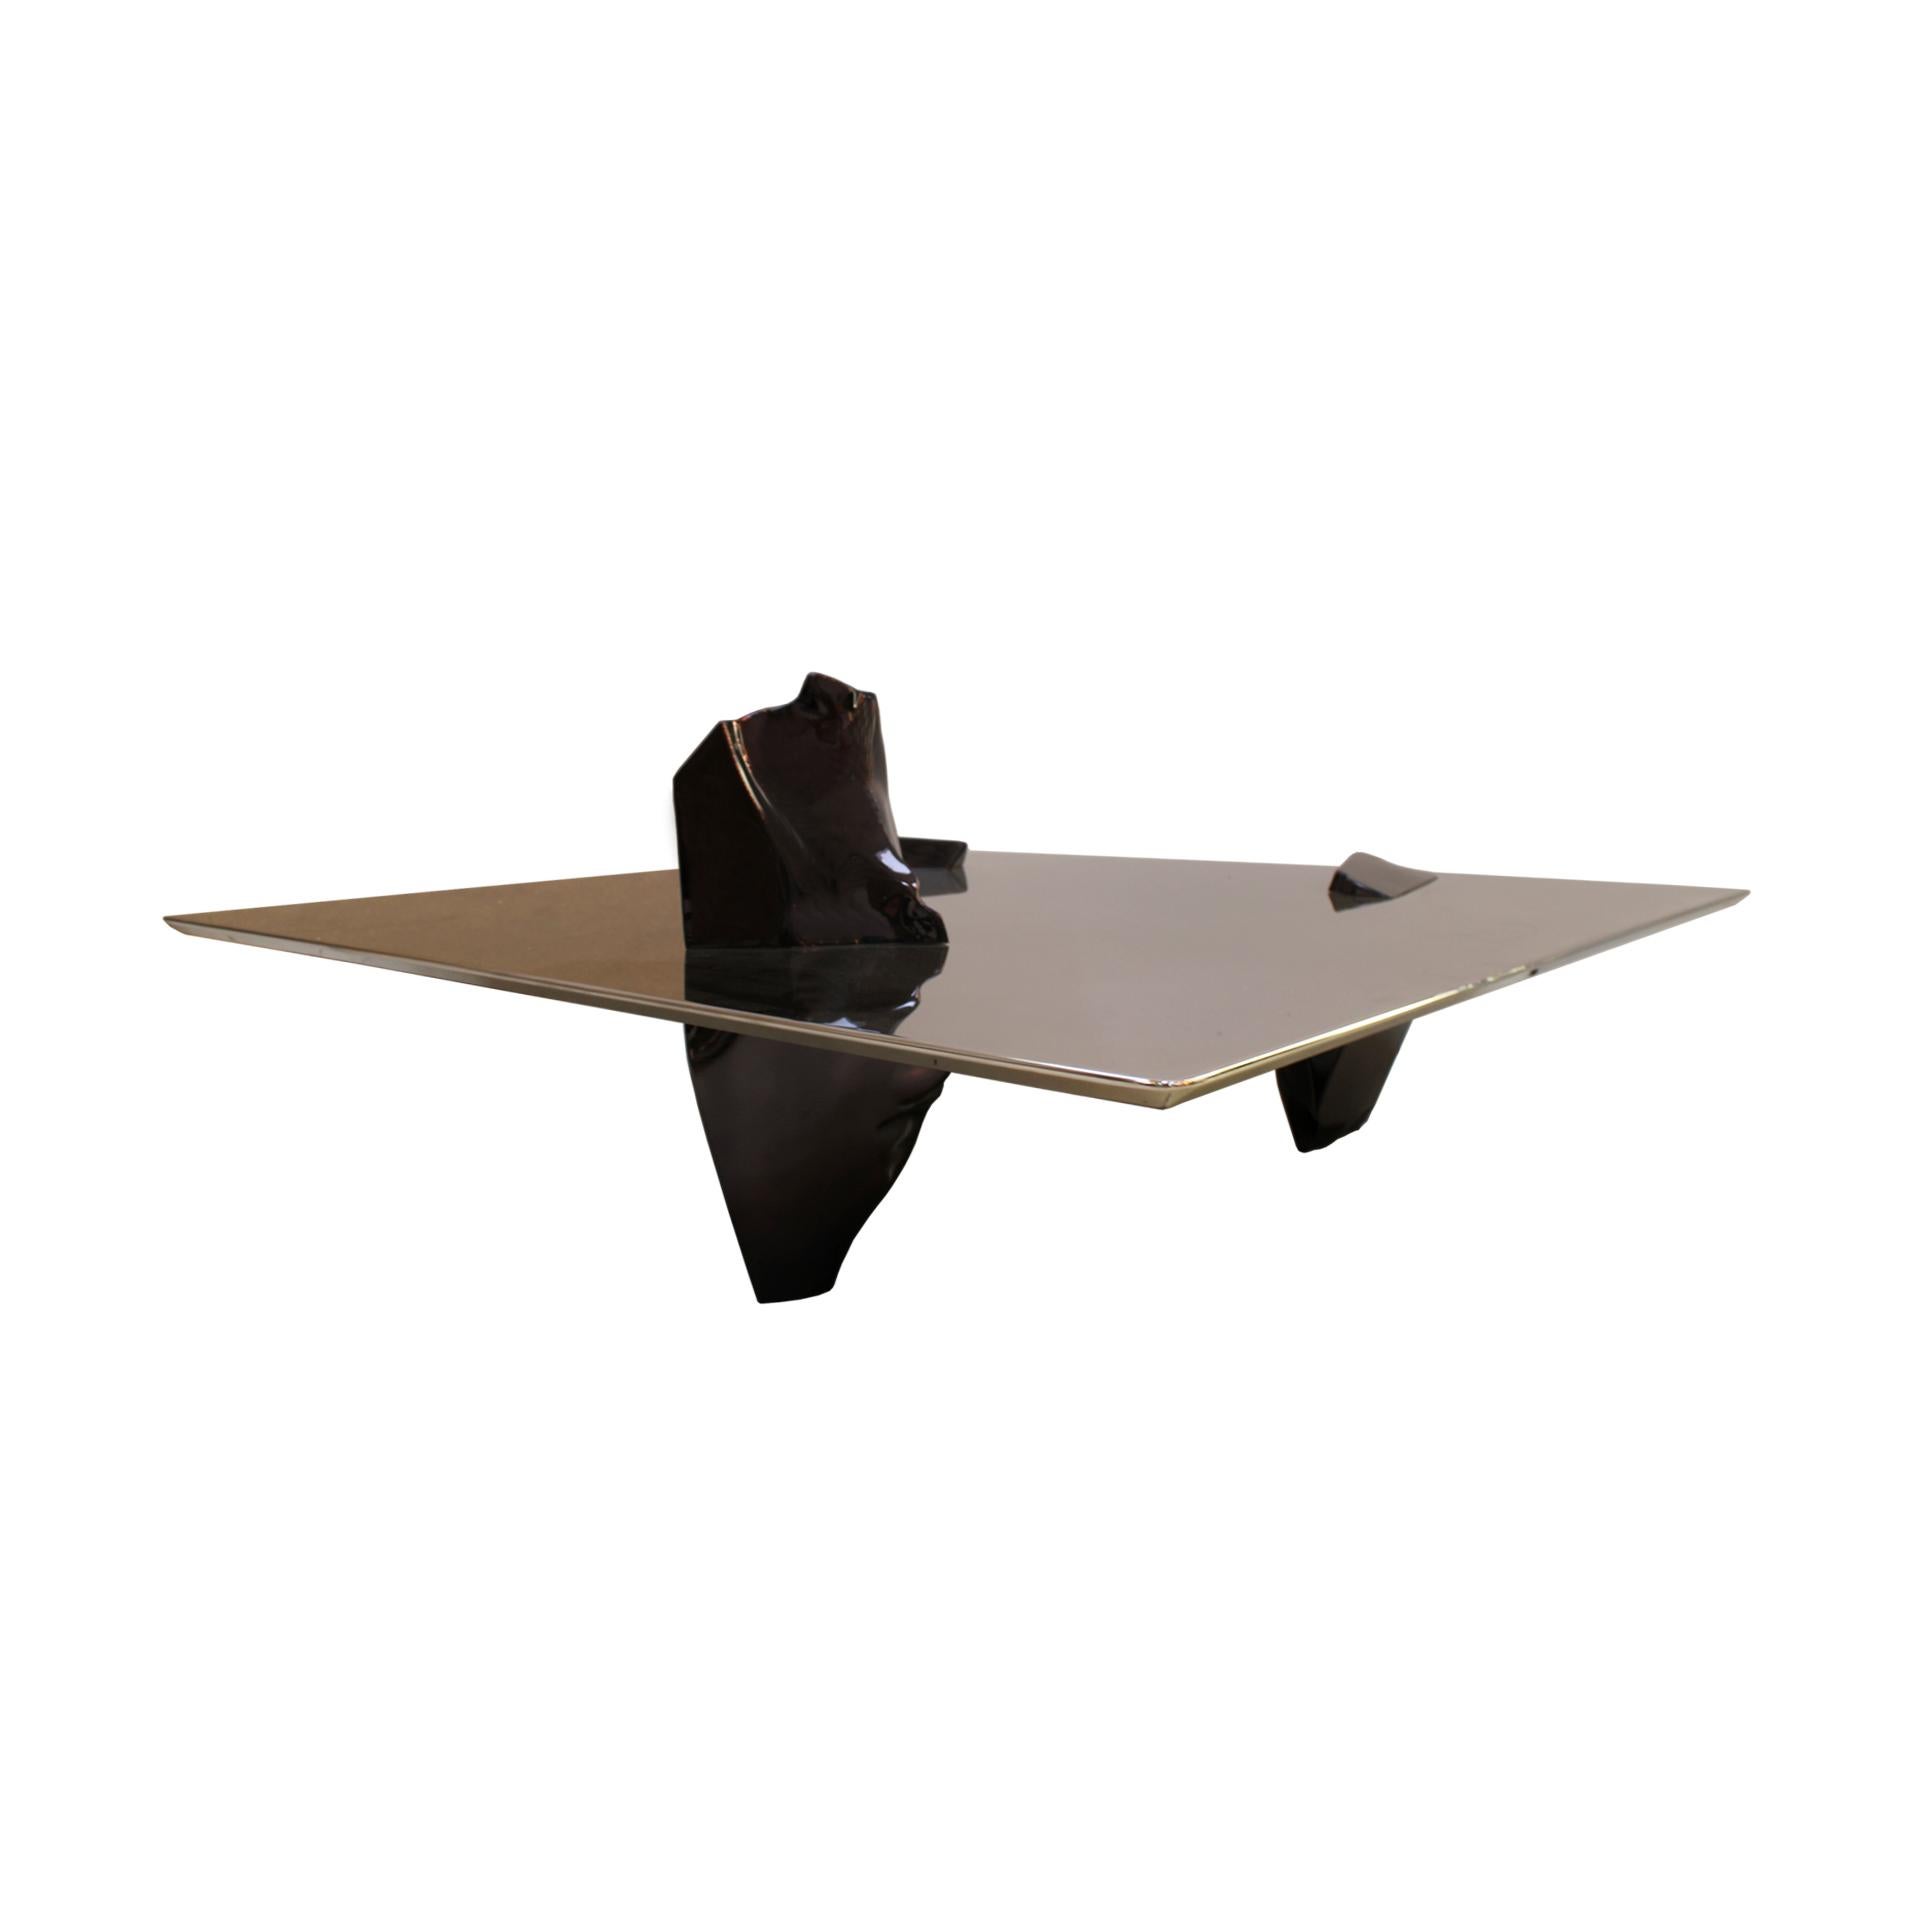 Sereno model coffee table designed by Fredrikson Stallard for Driade. Structure formed by three sculptural pieces in cast aluminum finished in black titanium. Top made of wood covered in thick mirror polished stainless steel sheet. Italy 21st